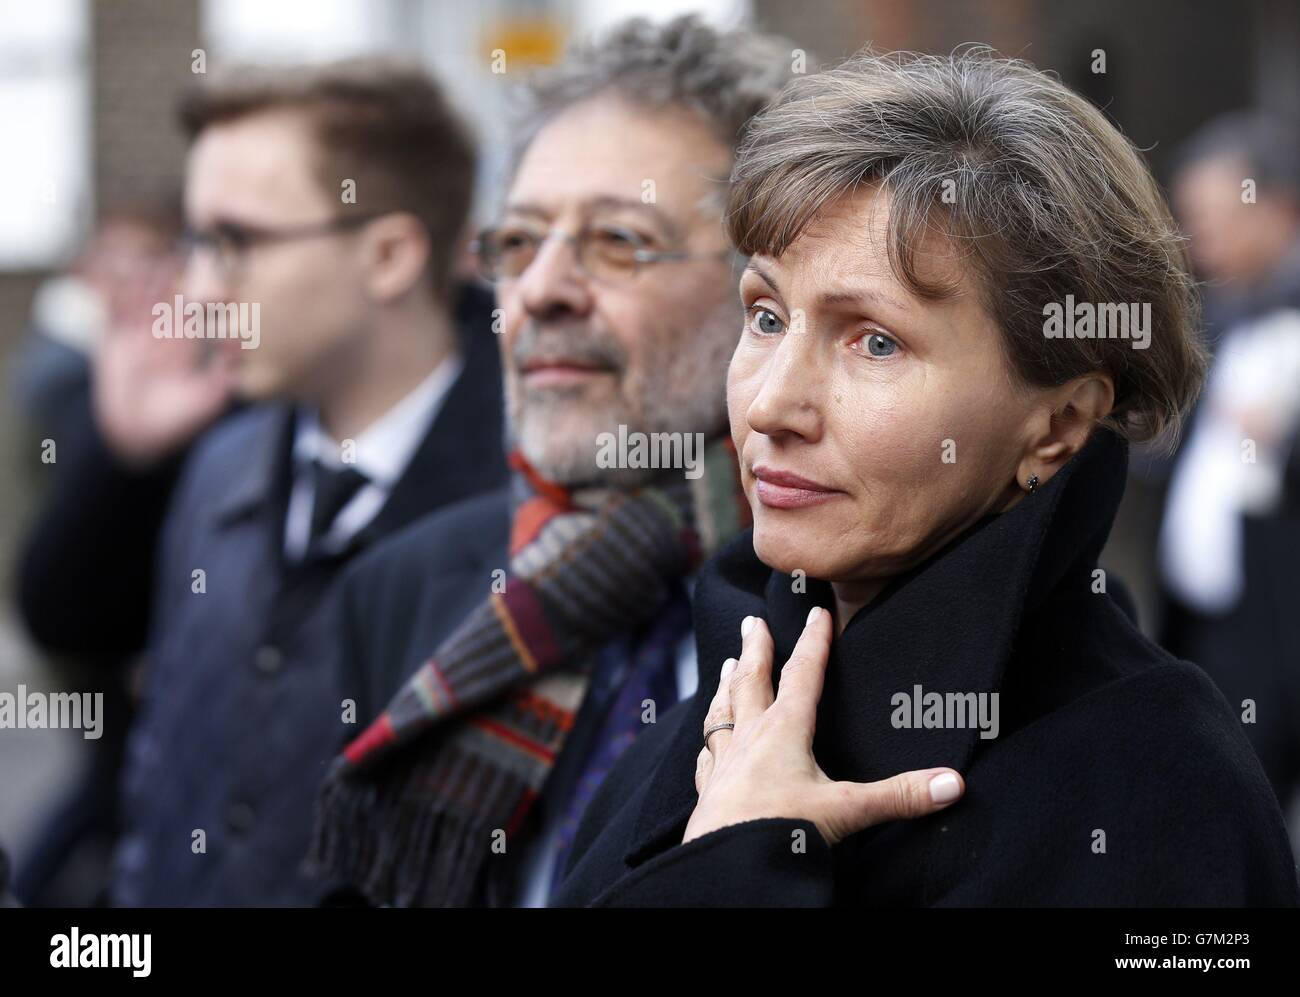 Marina Litvinenko outside the Royal Courts of Justice, London, where the long-awaited public inquiry into the death of poisoned spy Alexander Litvinenko is finally set to open, more than eight years after his death. Stock Photo